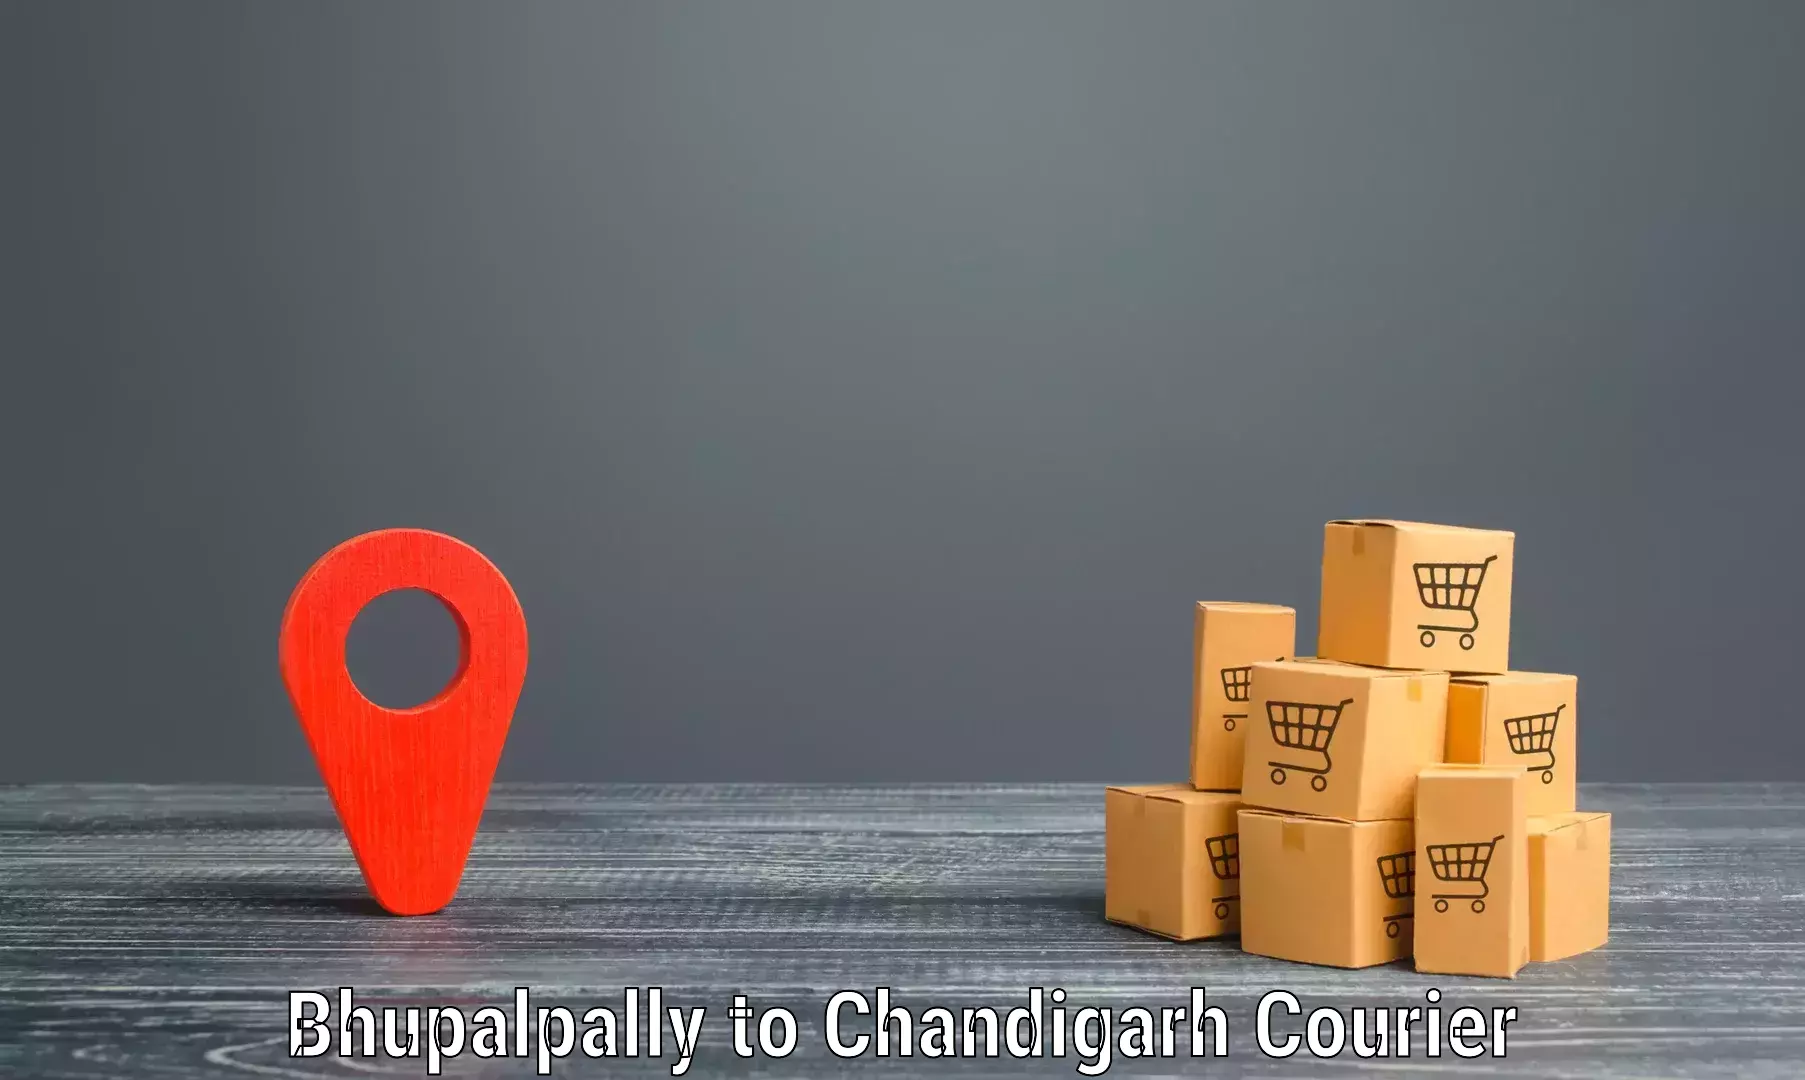 Global parcel delivery Bhupalpally to Chandigarh